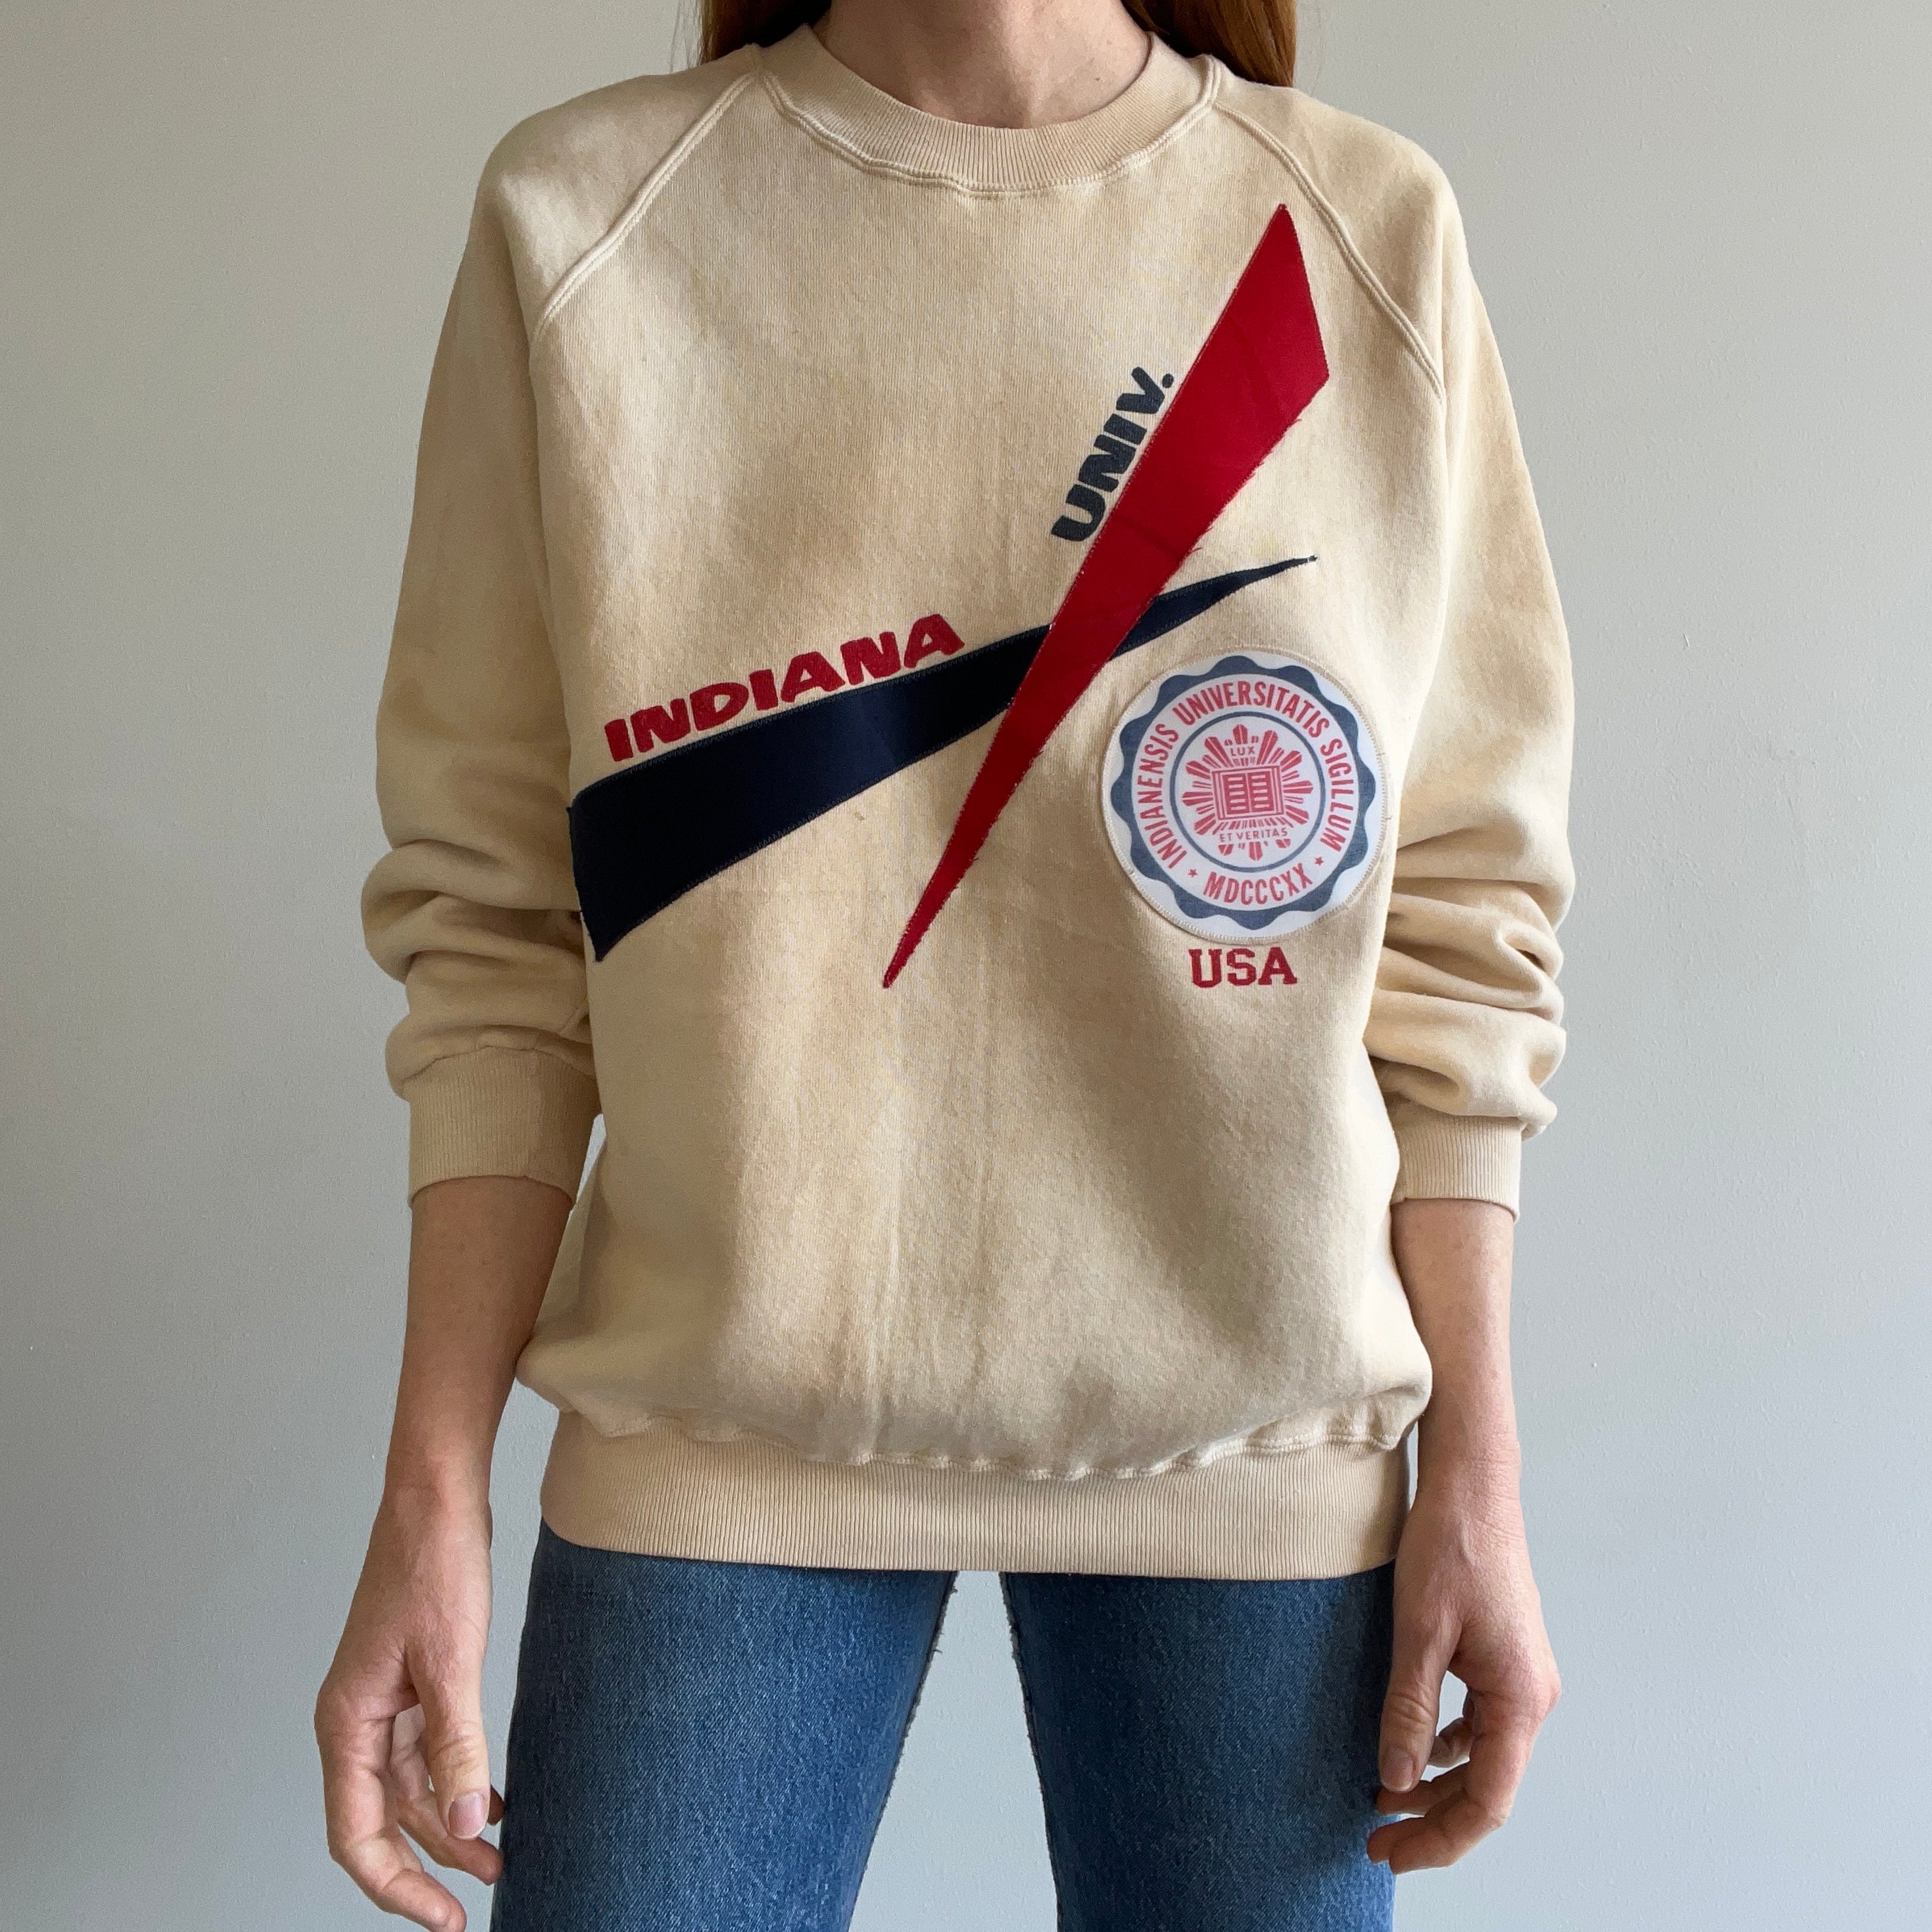 1970s Epic Aged to Ecru Indiana University Sweatshirt by Collegiate Pacific !!!